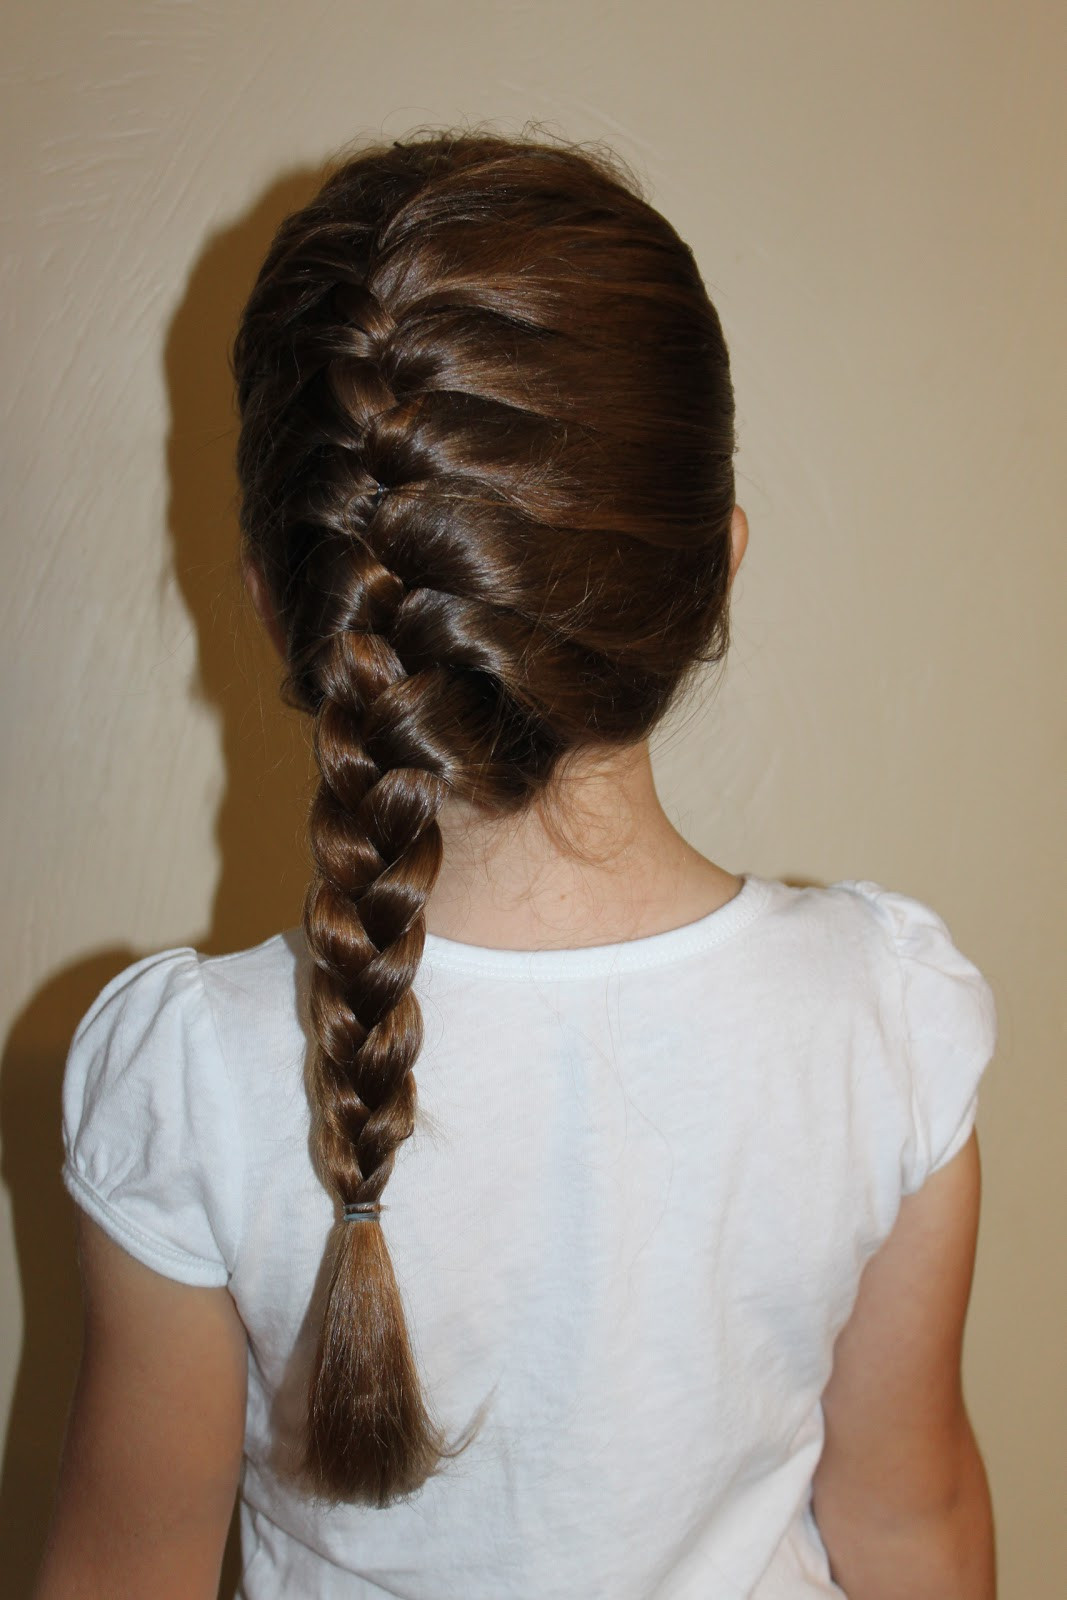 Easy French Braid Hairstyles
 Hairstyles for Girls The Wright Hair Side French Braid